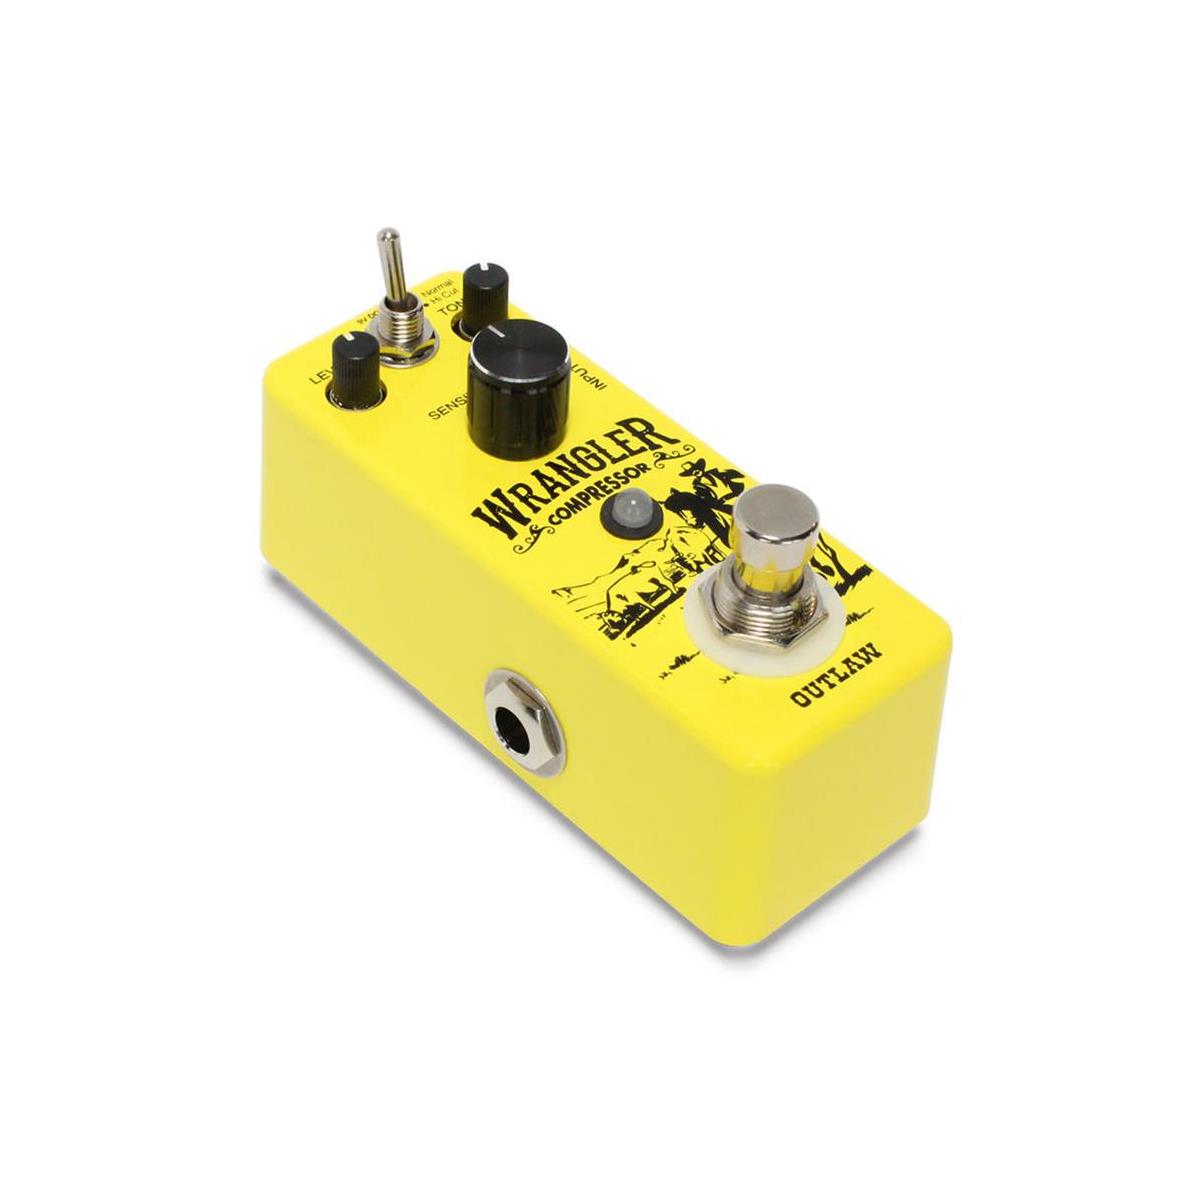 Image of Outlaw Wrangler Compressor 2-Mode Effects Pedal